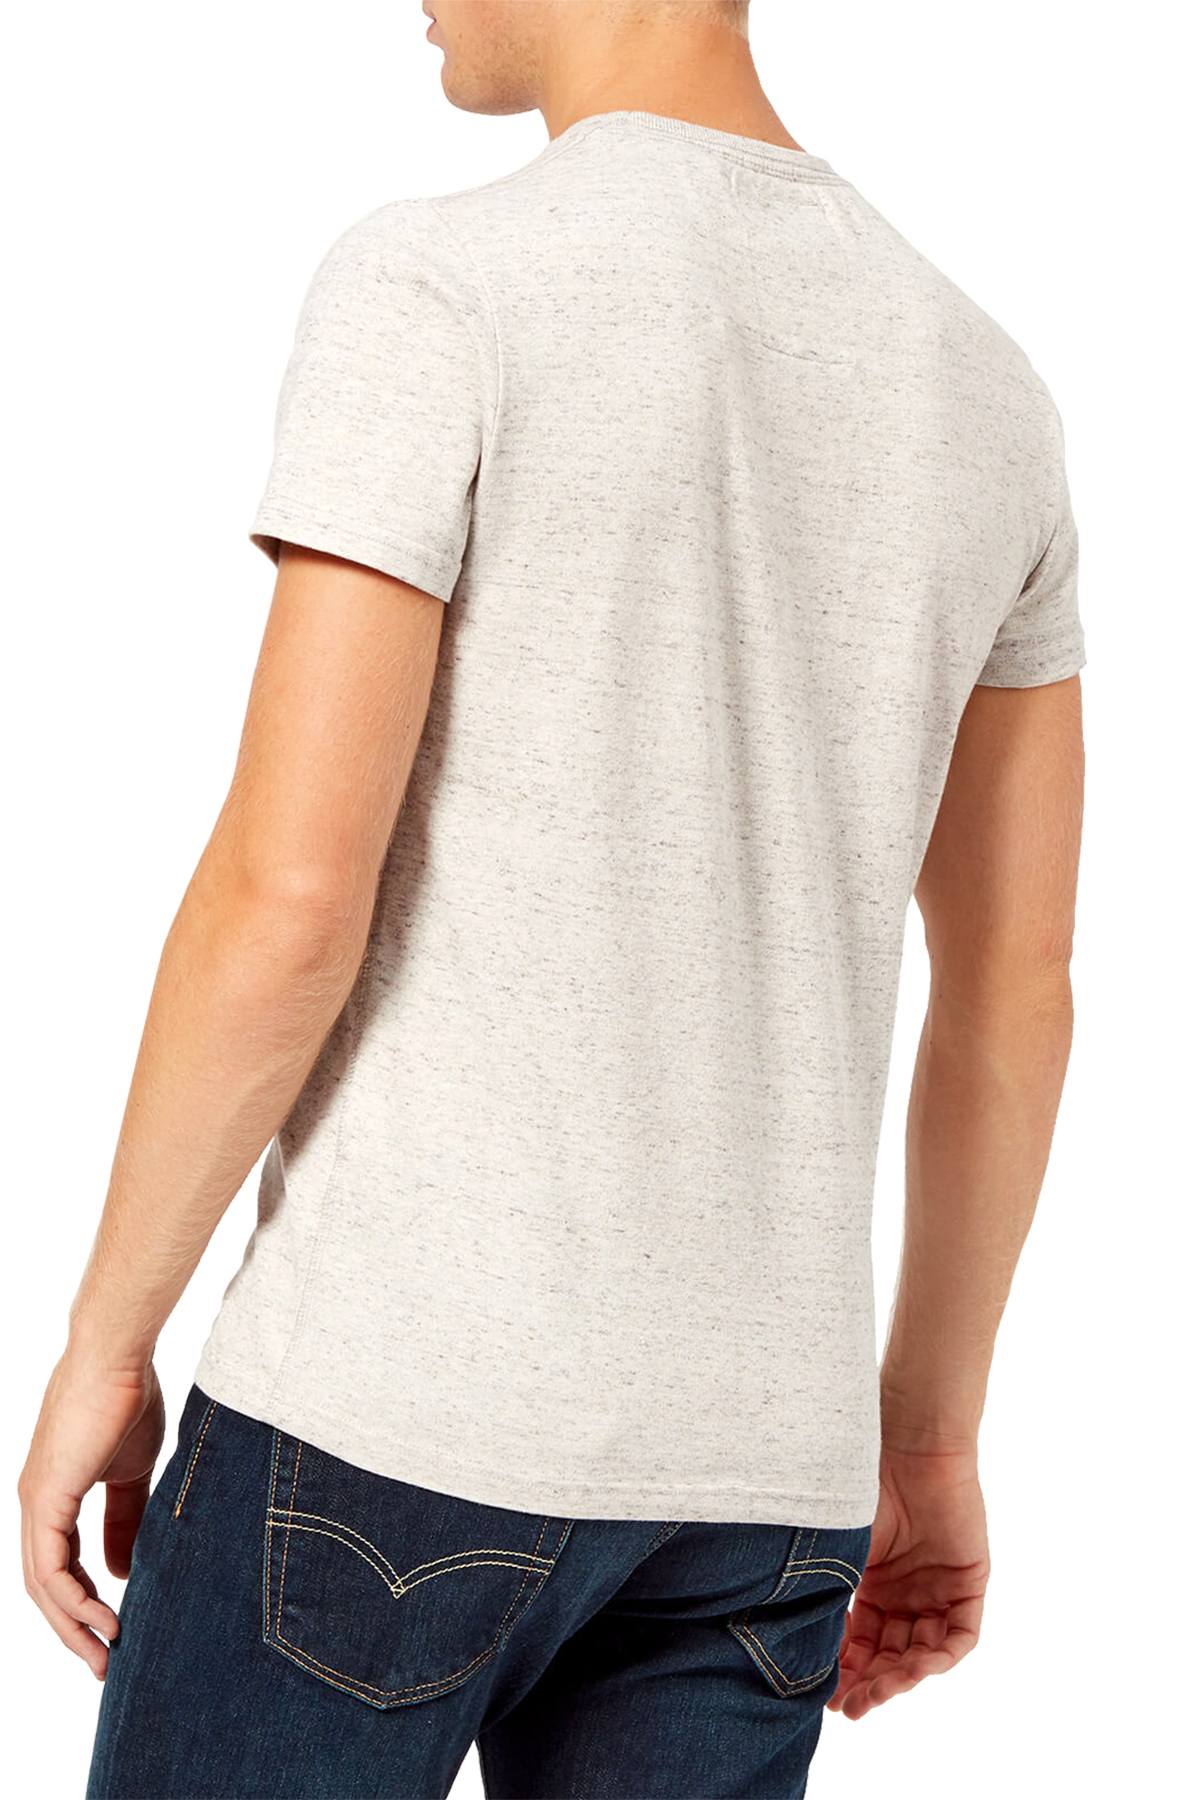 SuperDry Sea-Stone/Snowy-Grey NYC Goods Co T-Shirt